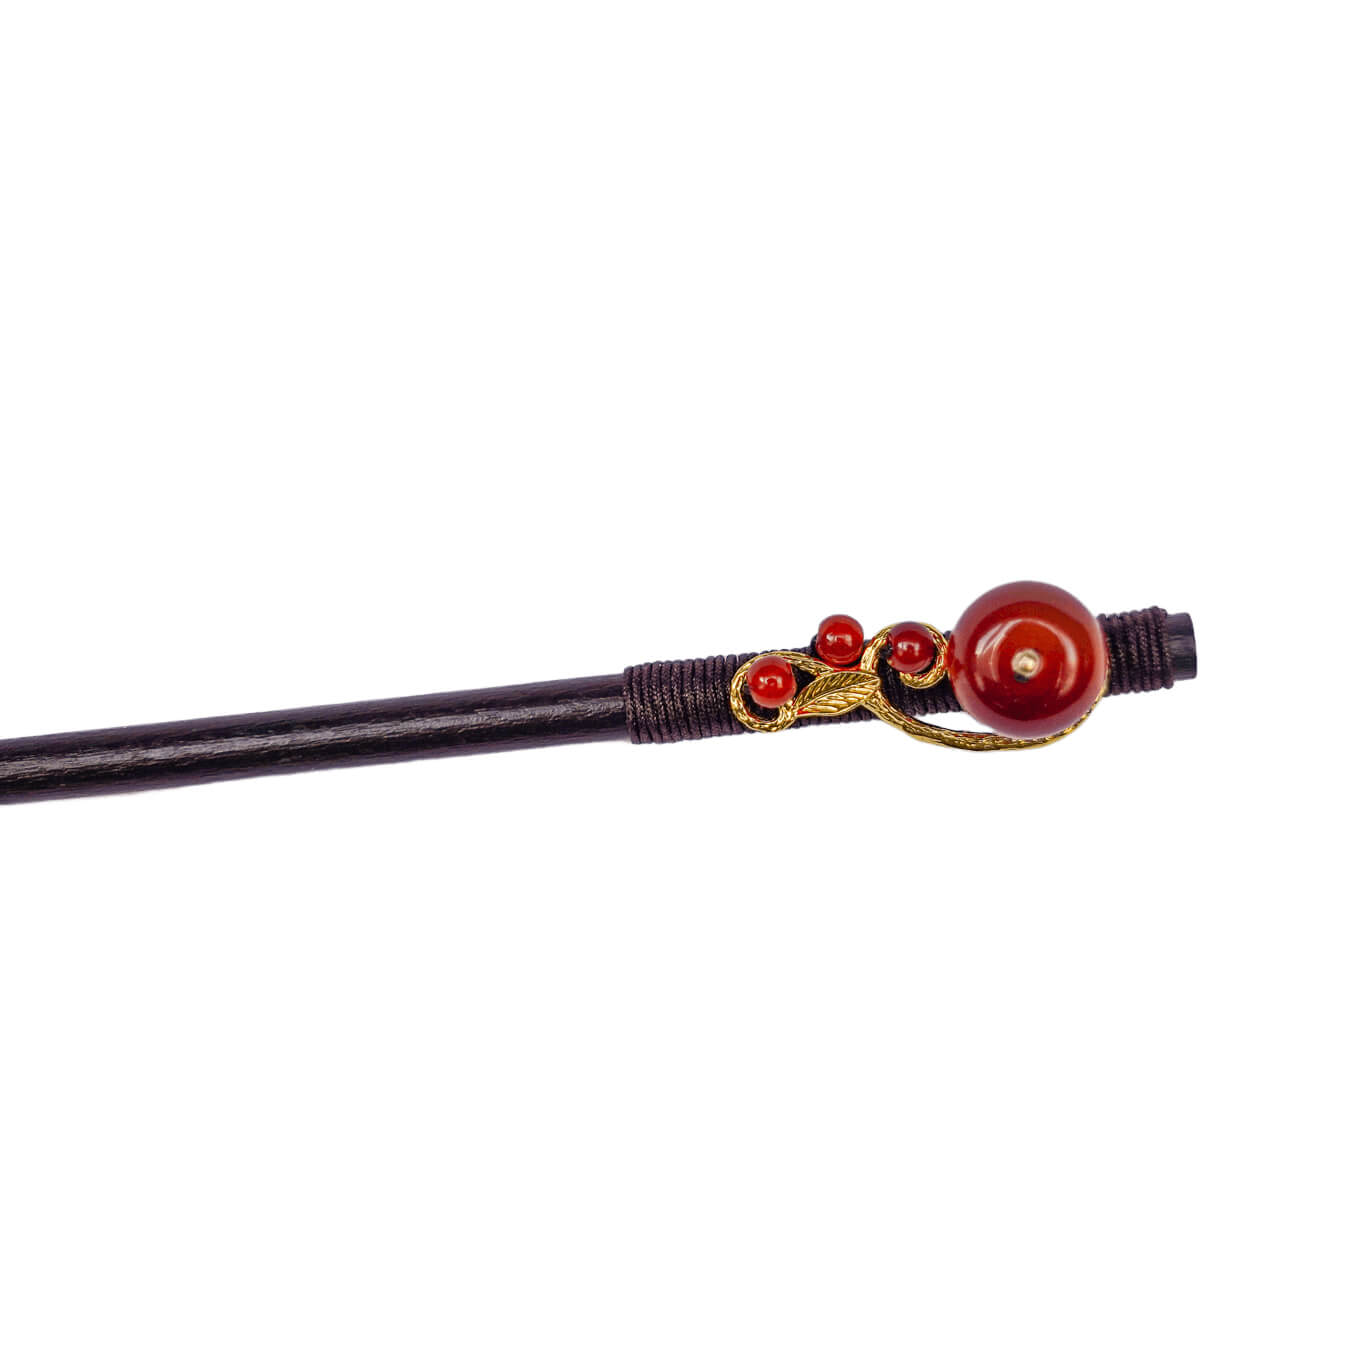 GUDOU - Ancient Chinese Style Wood Hairpin